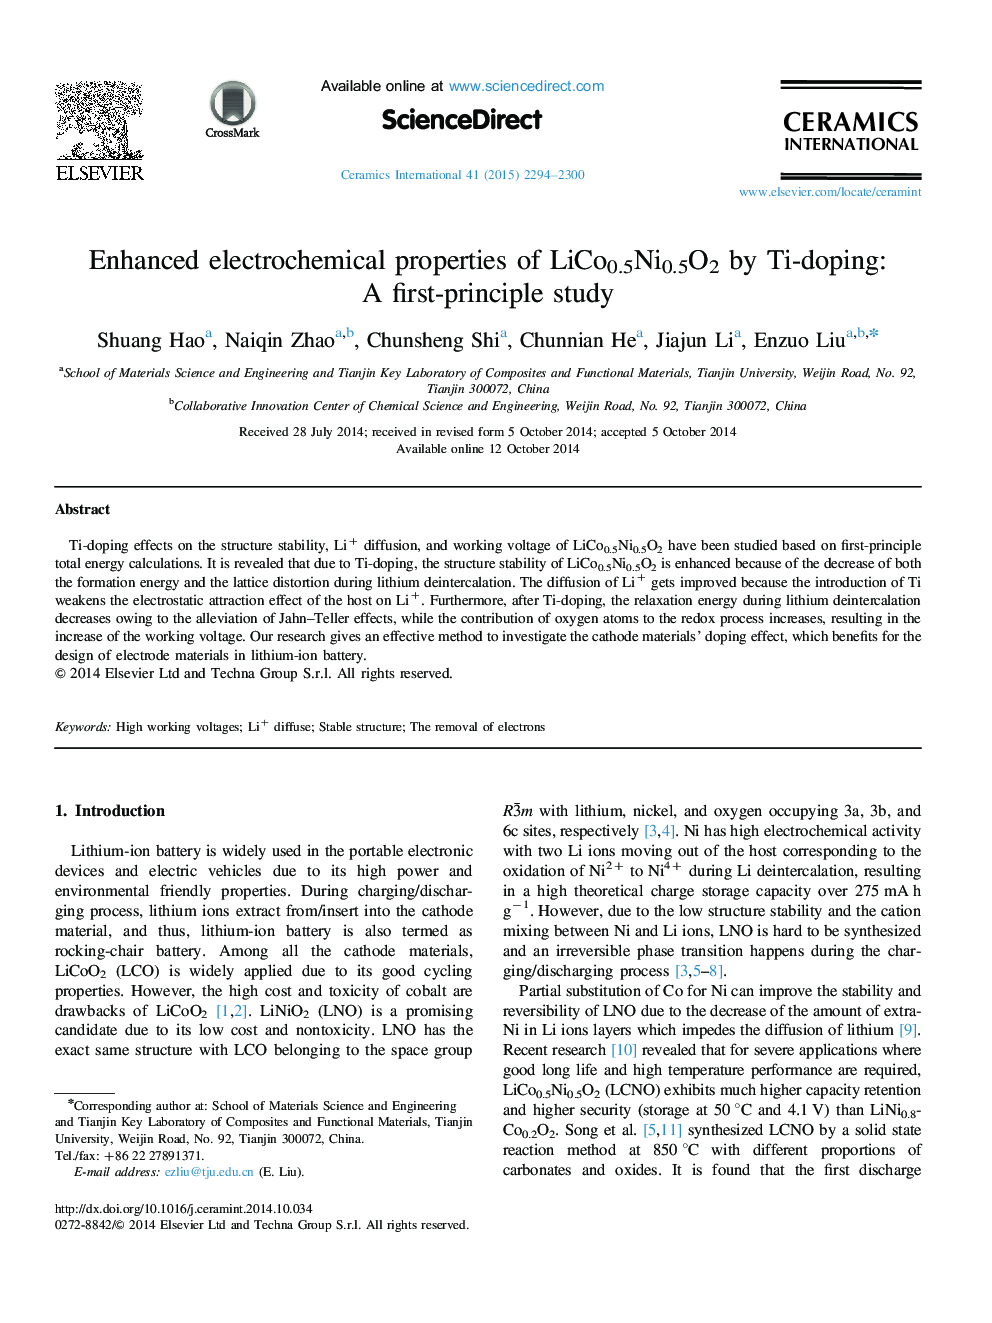 Enhanced electrochemical properties of LiCo0.5Ni0.5O2 by Ti-doping: A first-principle study